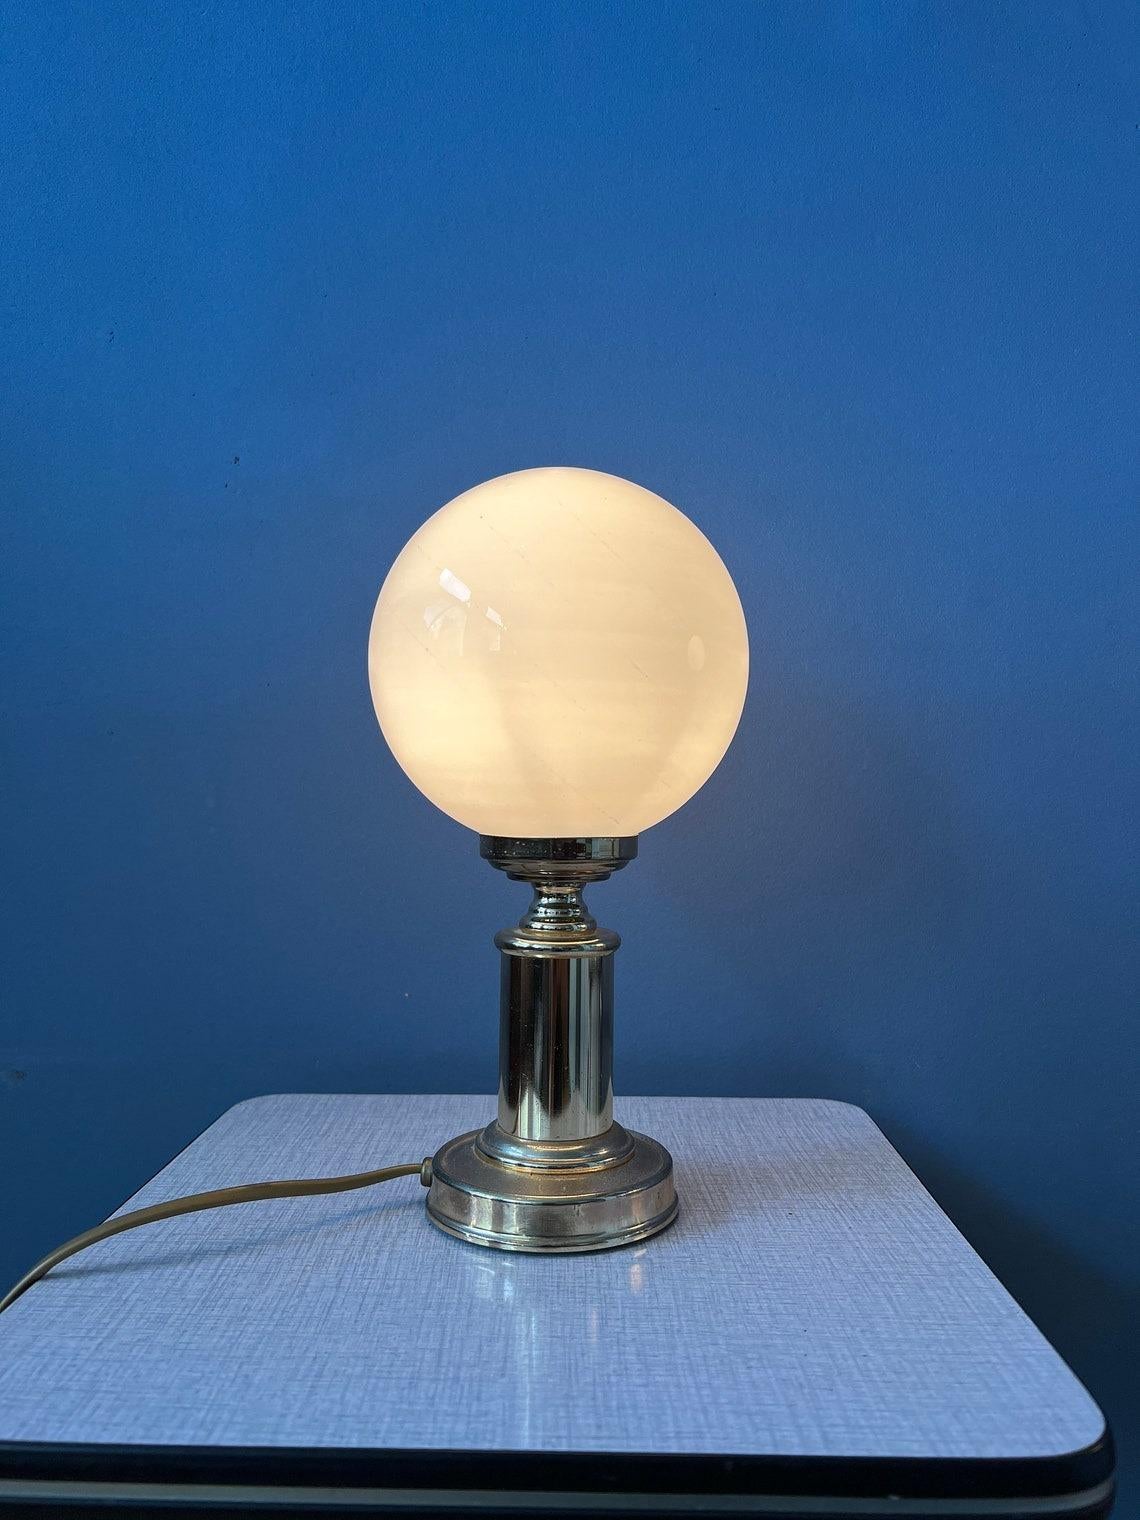 Set of mid century hollywood regency table lamps with golden base and opaline glass shade. The lamp require E14 lightbulbs and currently have EU-plugs.

Additional information:
Materials: Glass, plastic
Period: 1970s
Dimensions: ø Shade: 13